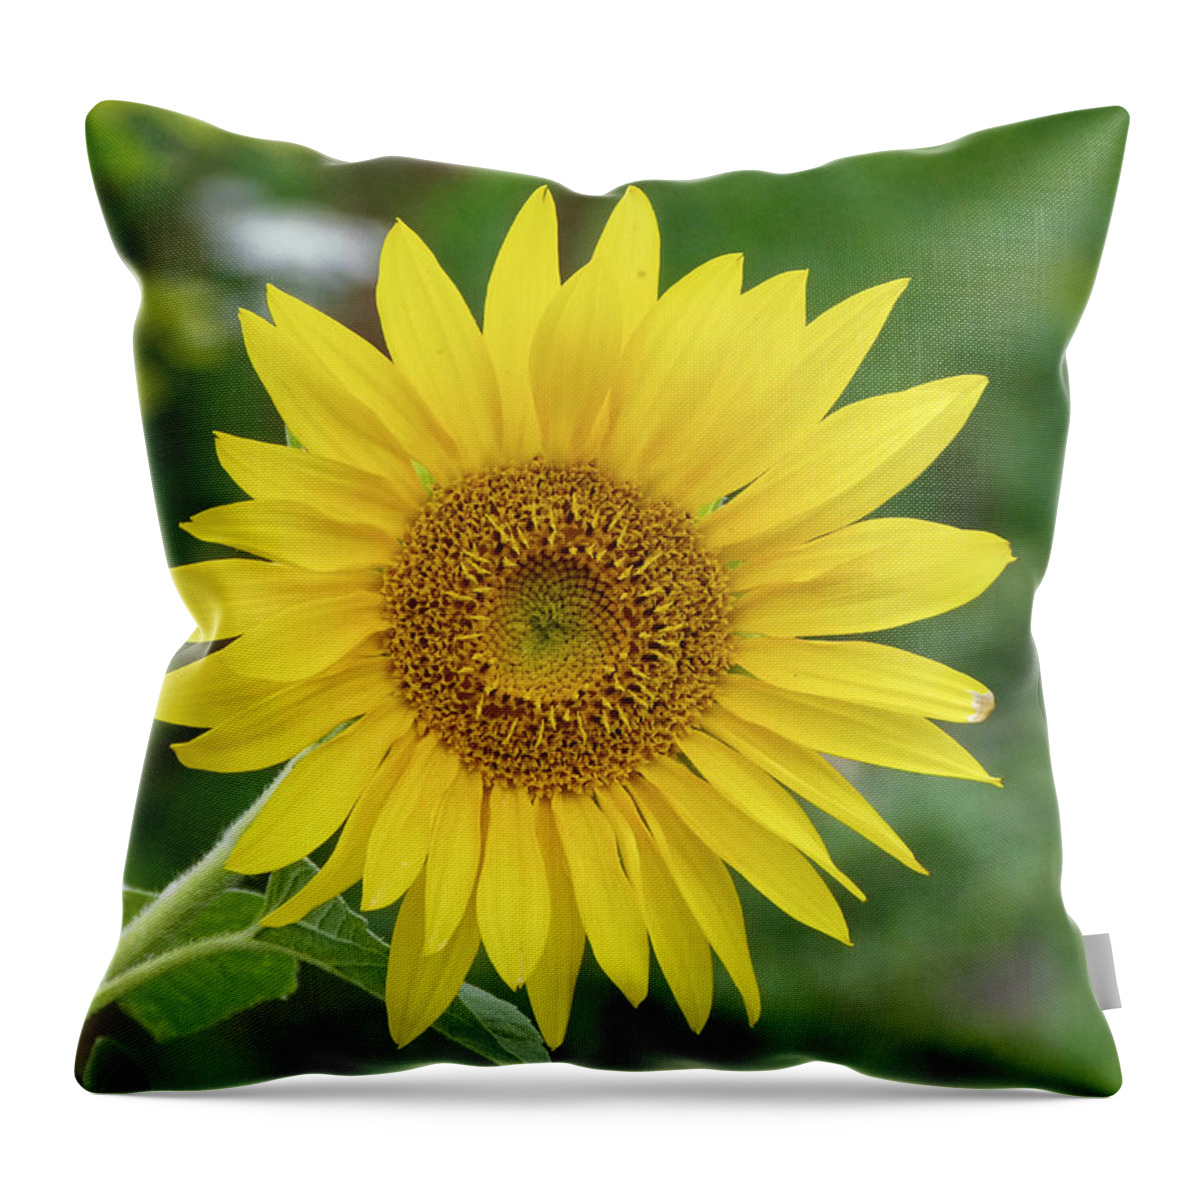 Sunflower Throw Pillow featuring the photograph Sunflower by Hartmut Knisel